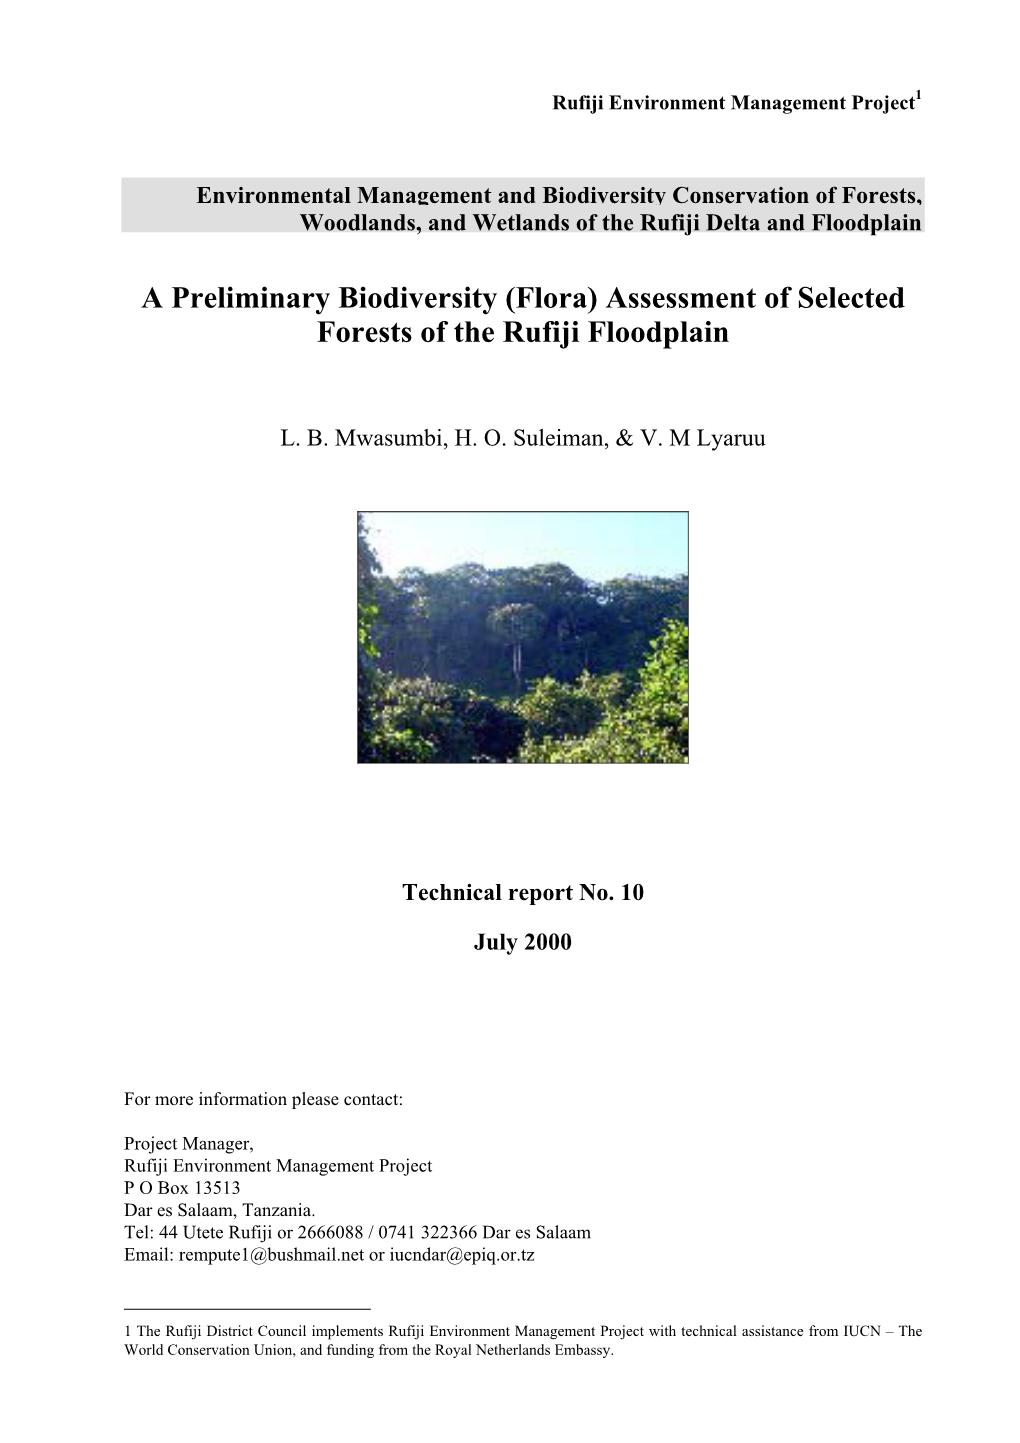 (Flora) Assessment of Selected Forests of the Rufiji Floodplain